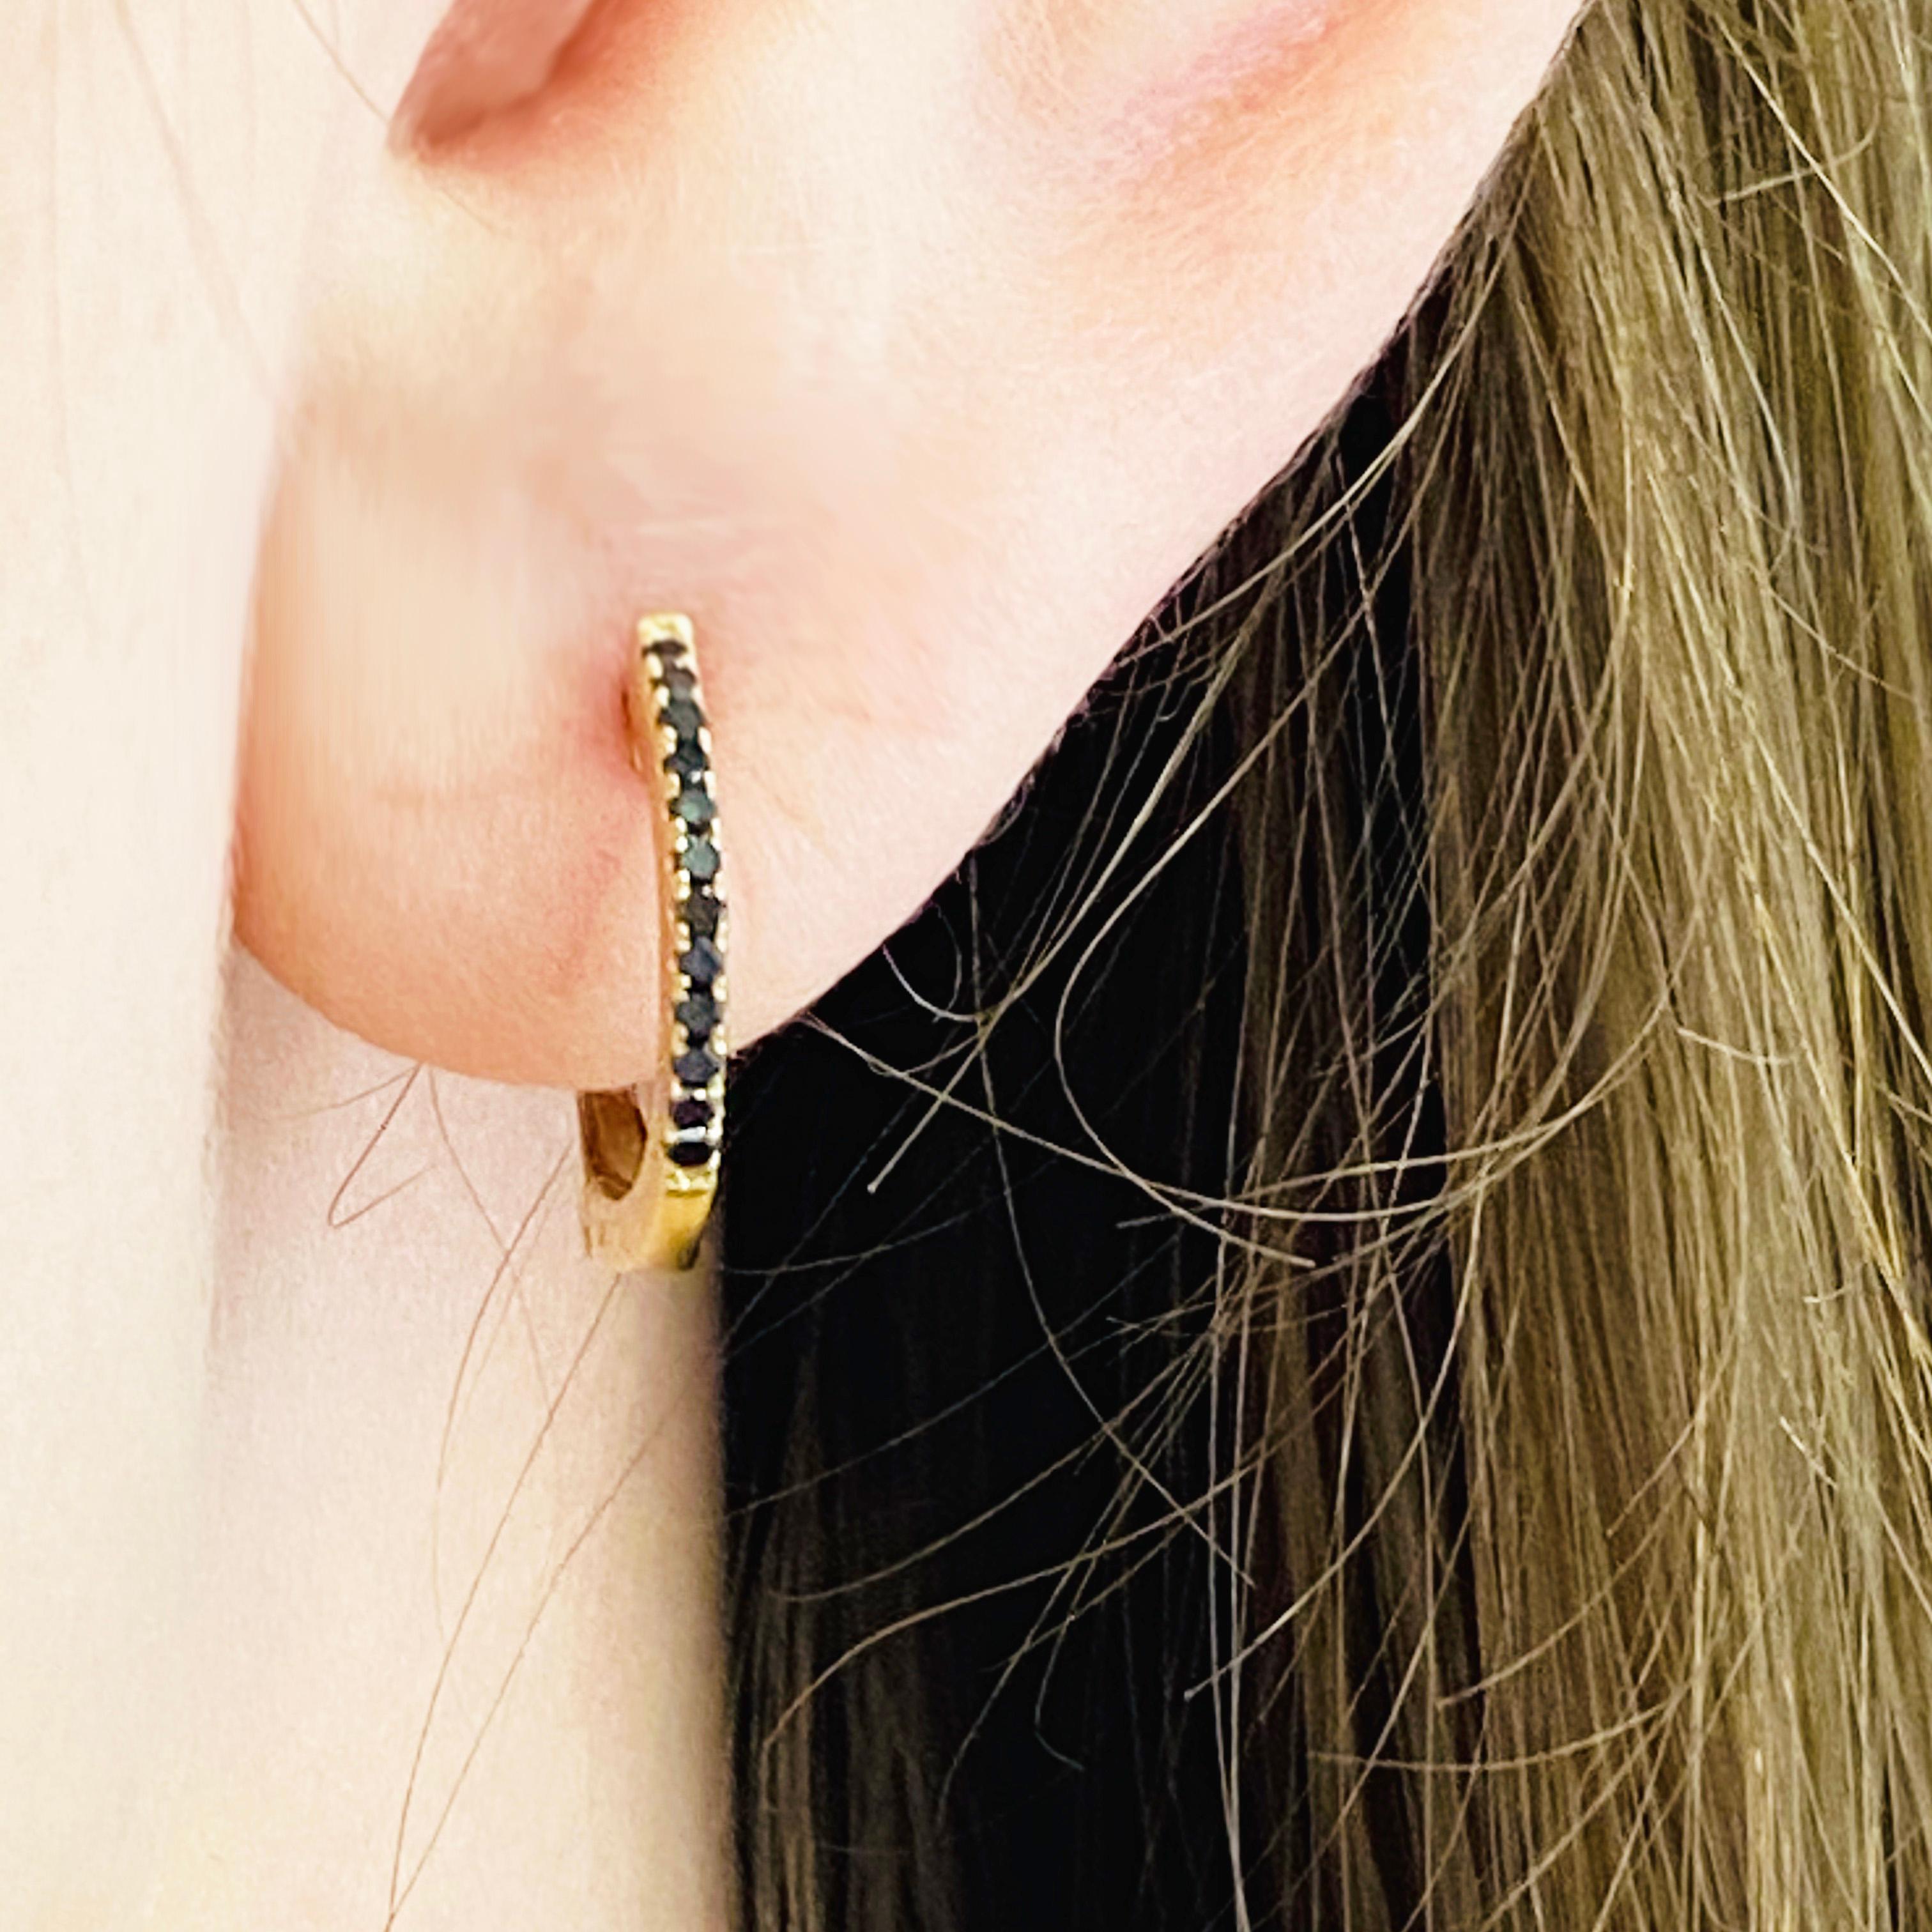 Edgy and modern black diamond huggies! Huggie earrings, mini hoops, have becomes the jewelry staple of the year! They are so easy and fun to wear. The small hoop earrings have round black diamonds set on the front in 14k yellow gold. The black